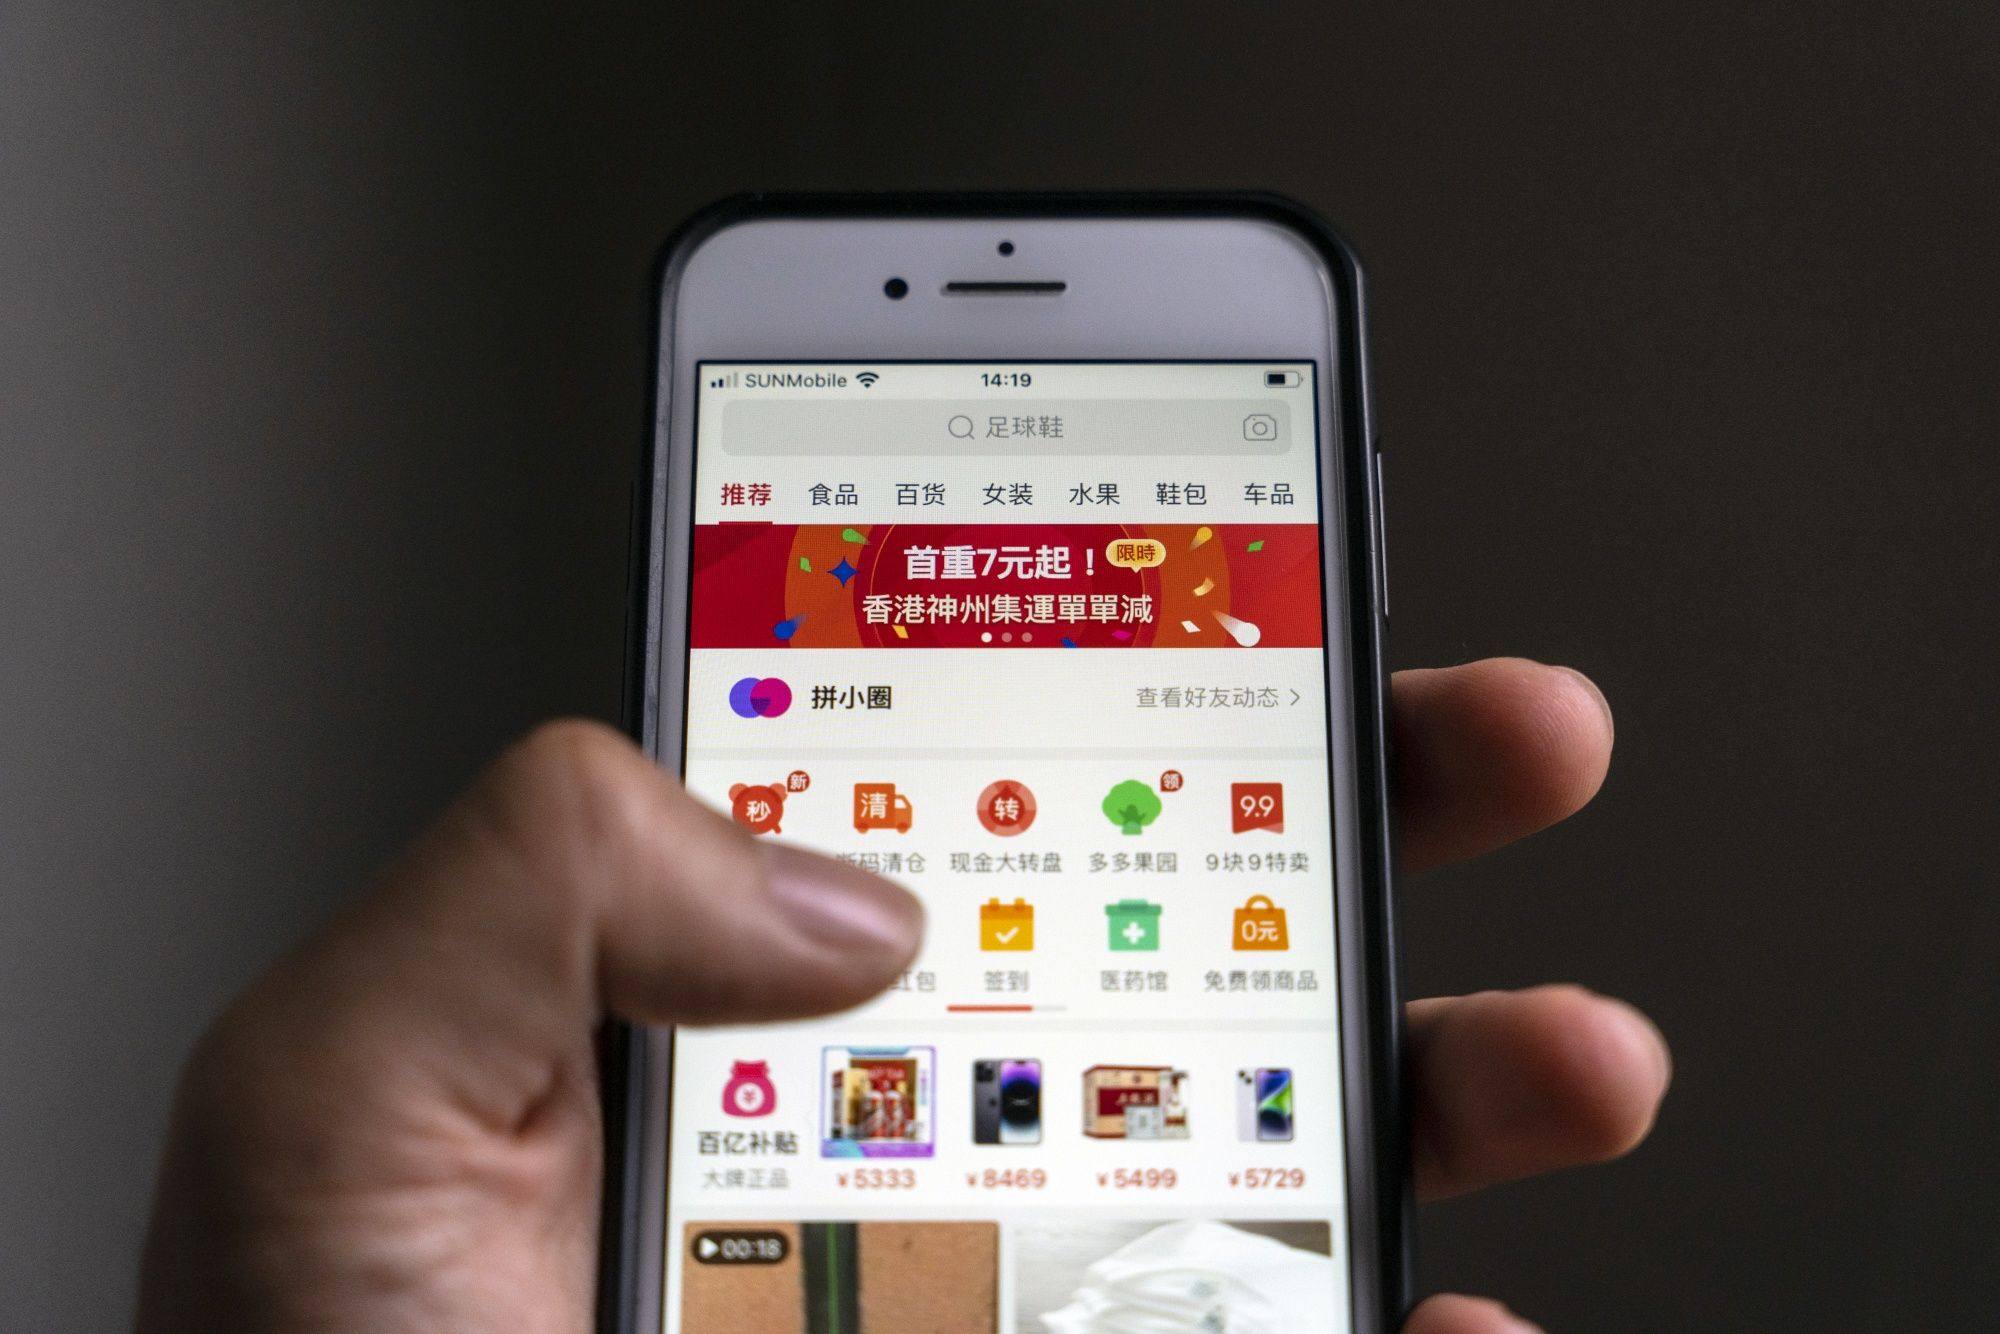 Chinese Big Tech firms have jostled for supremacy in a local services market expected to be worth 35 trillion yuan by 2025. Photo: Bloomberg